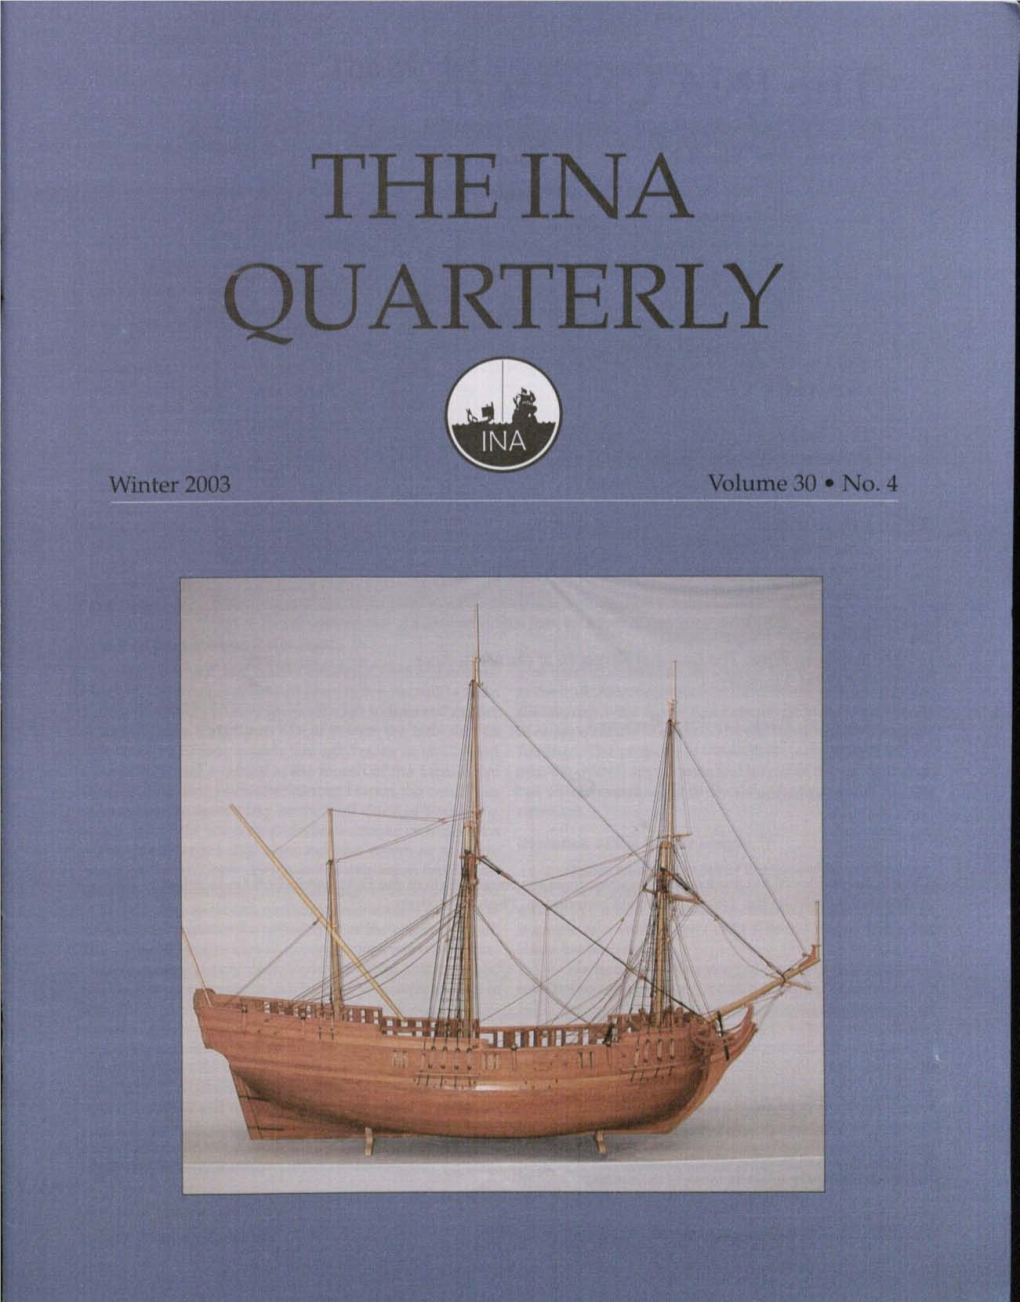 La Belle Learn Firsthand of the Latest Discov- Glenn Grieco Eries in Nautical Archaeology